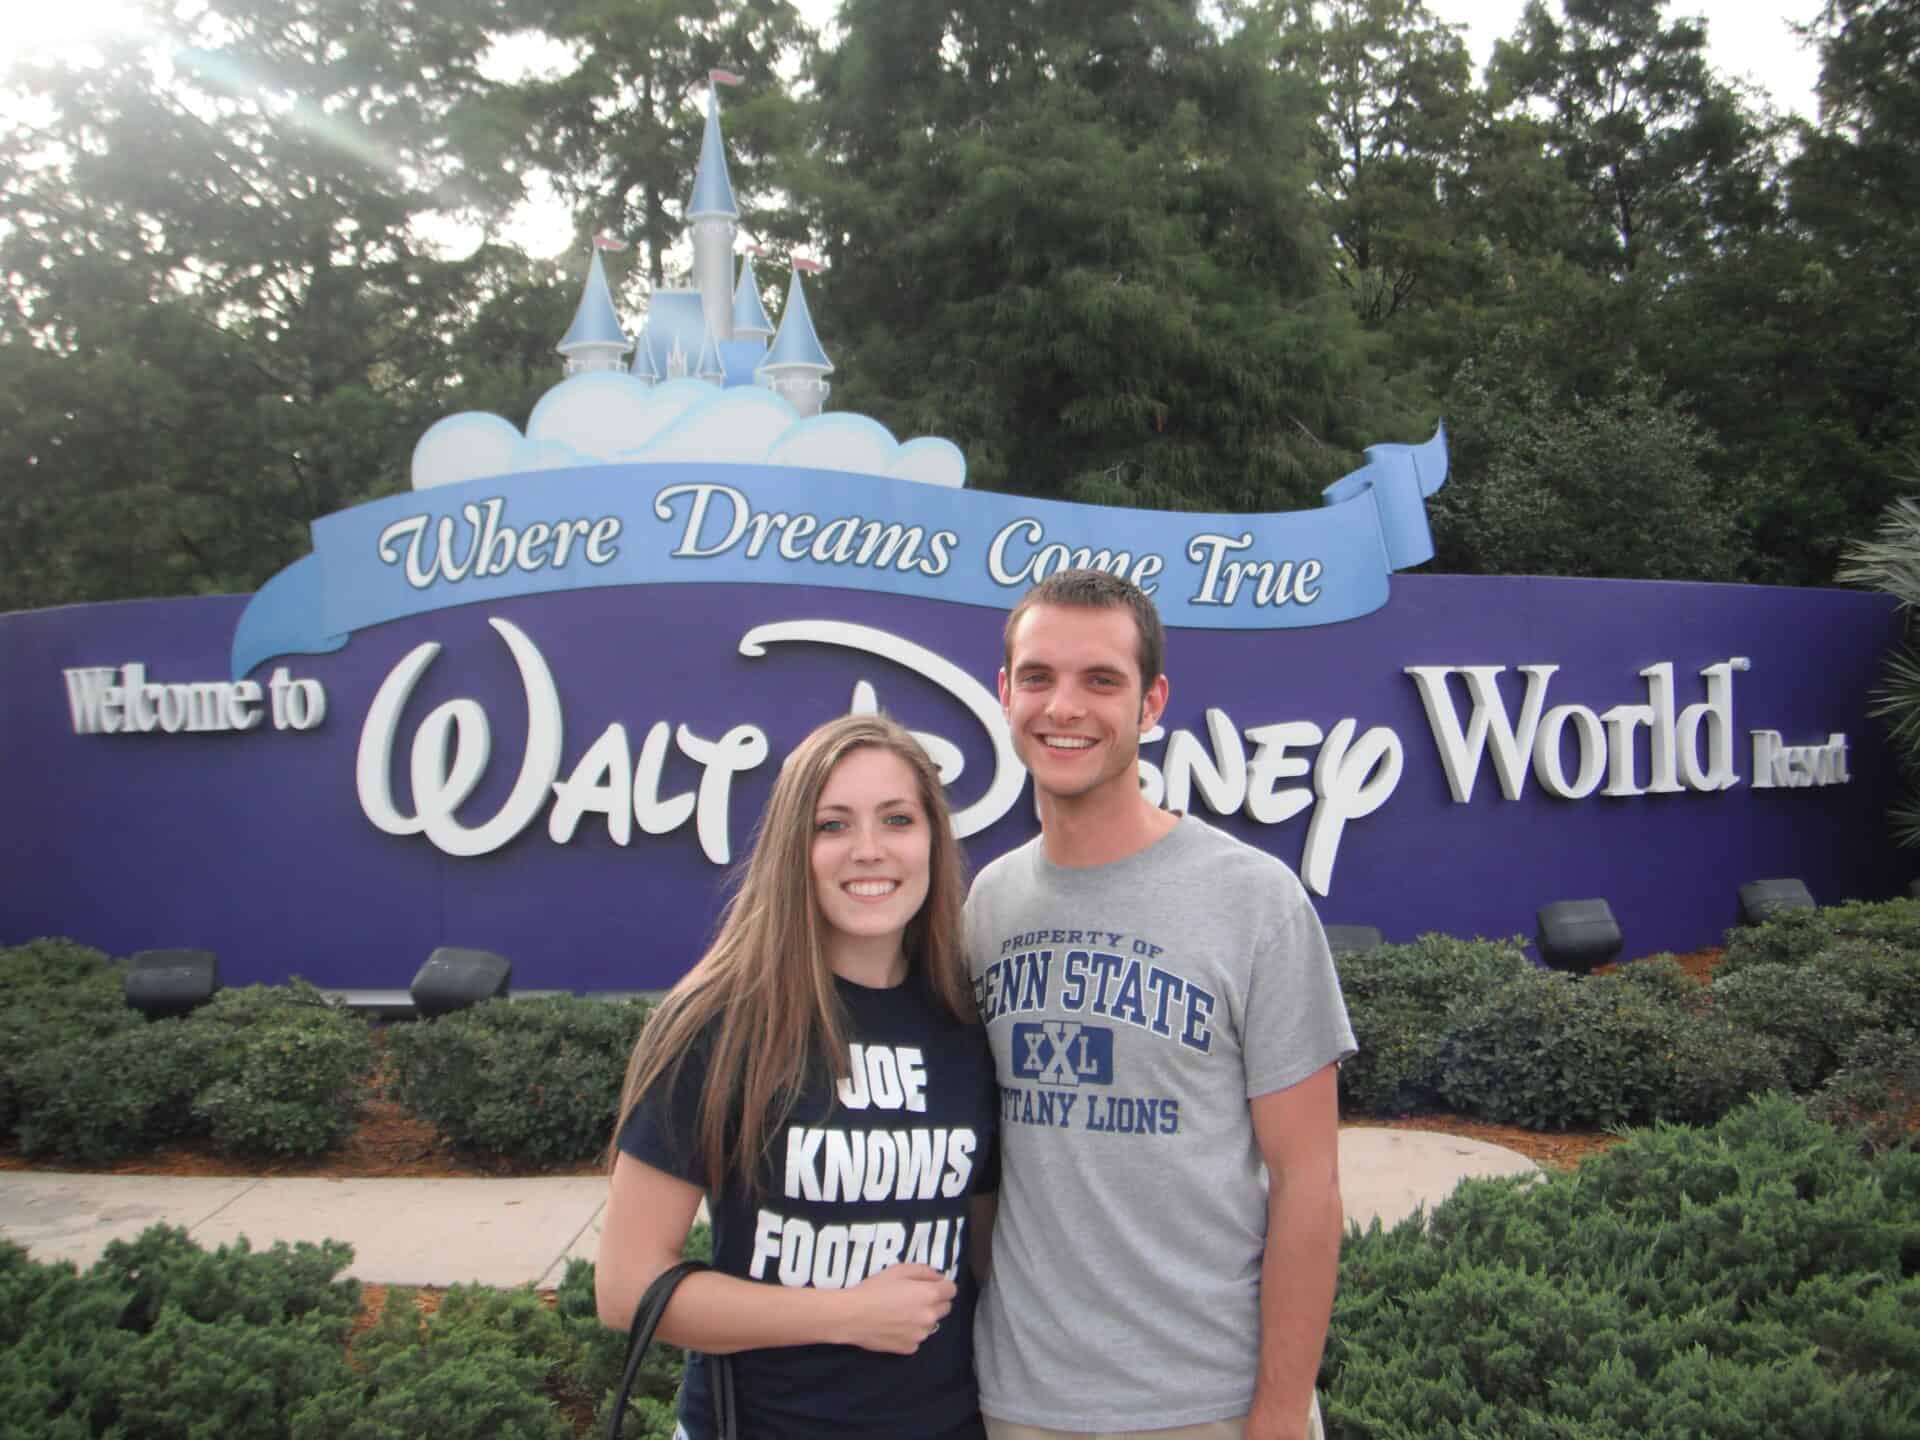 A man and woman standing in front of a Walt Disney World sign